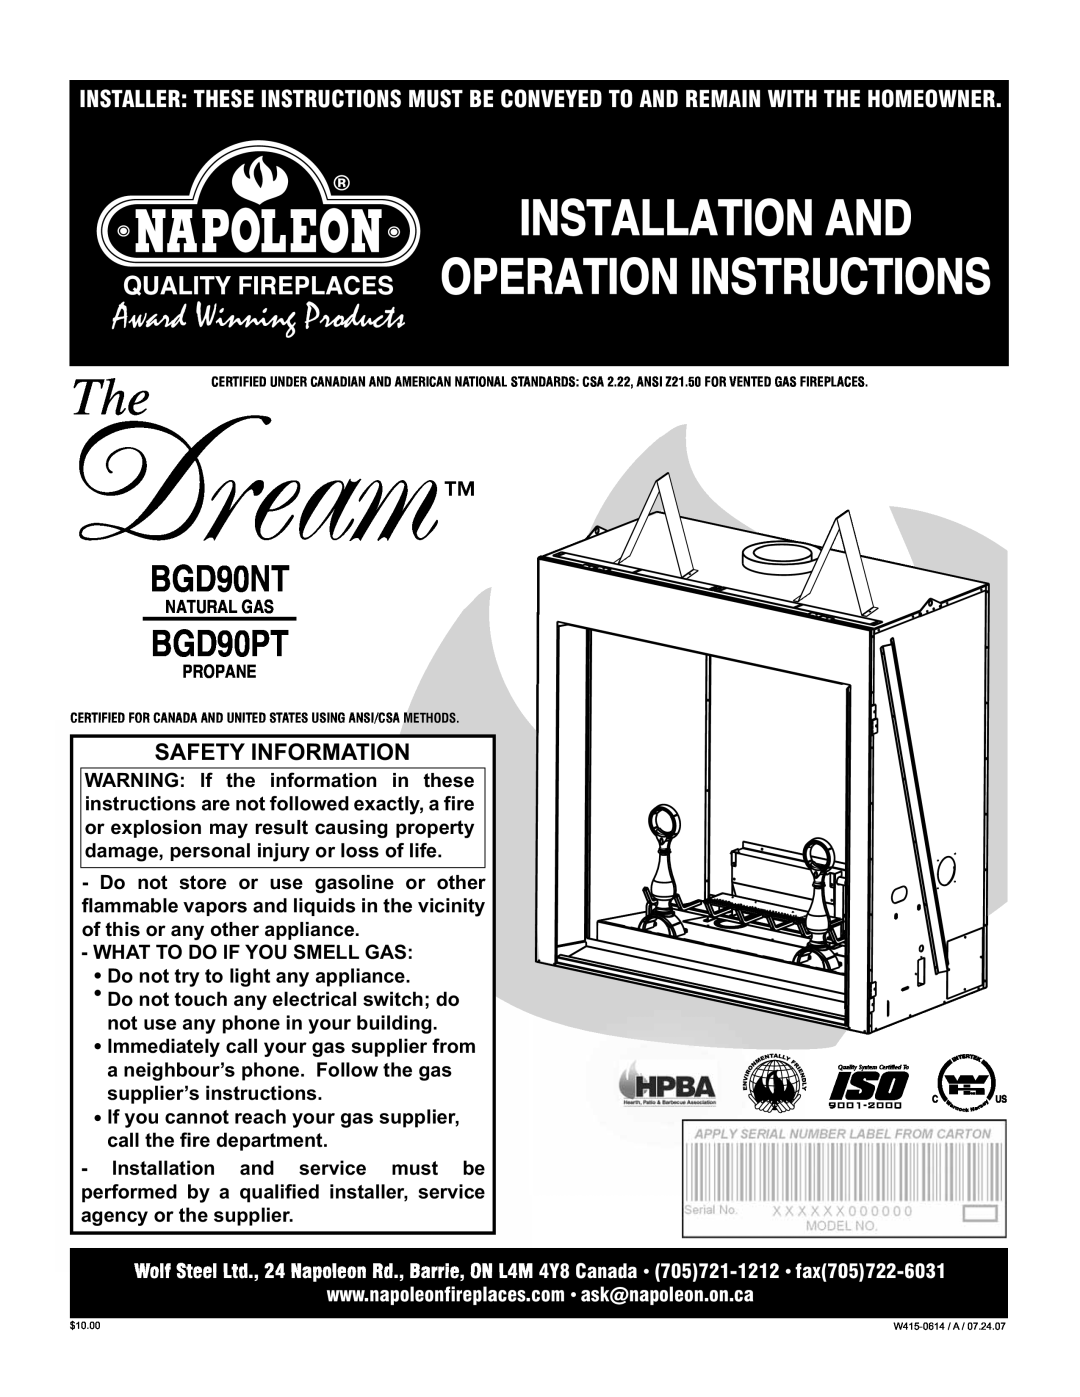 Napoleon Fireplaces BGD90NT manual Safety Information, Installation And, Operation Instructions, BGD90PT 